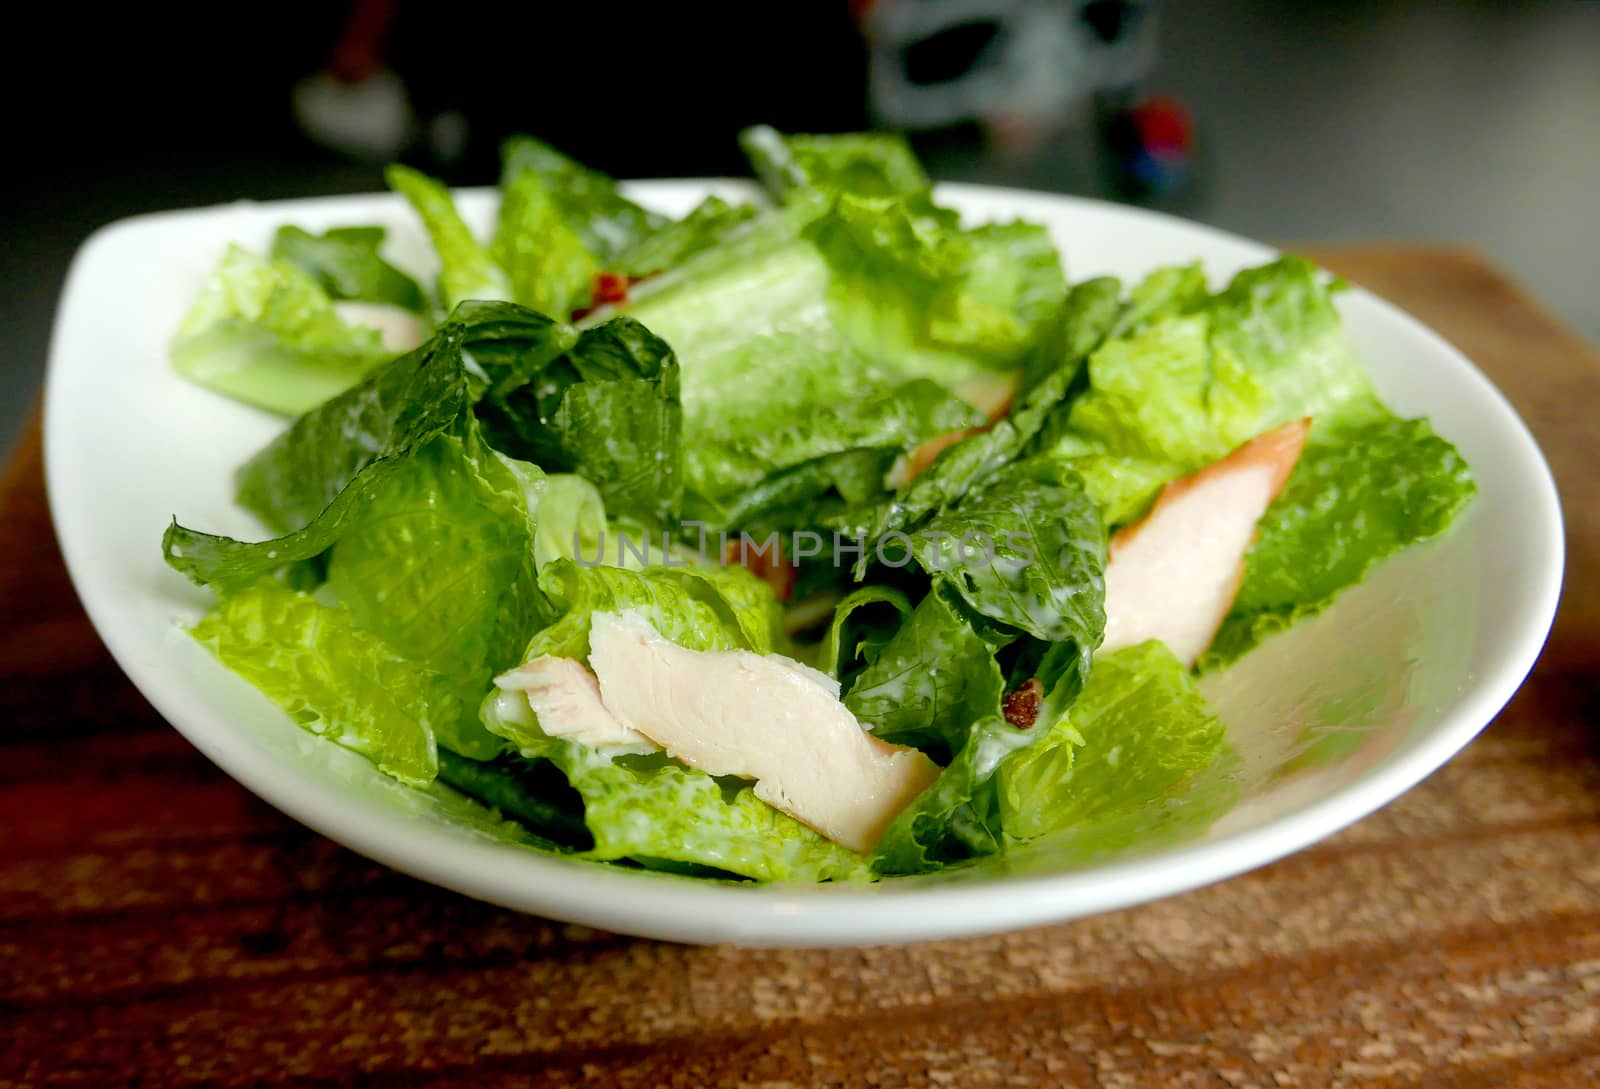 Chicken, meat, lettuce delicious ceasar salad in white dish by cougarsan